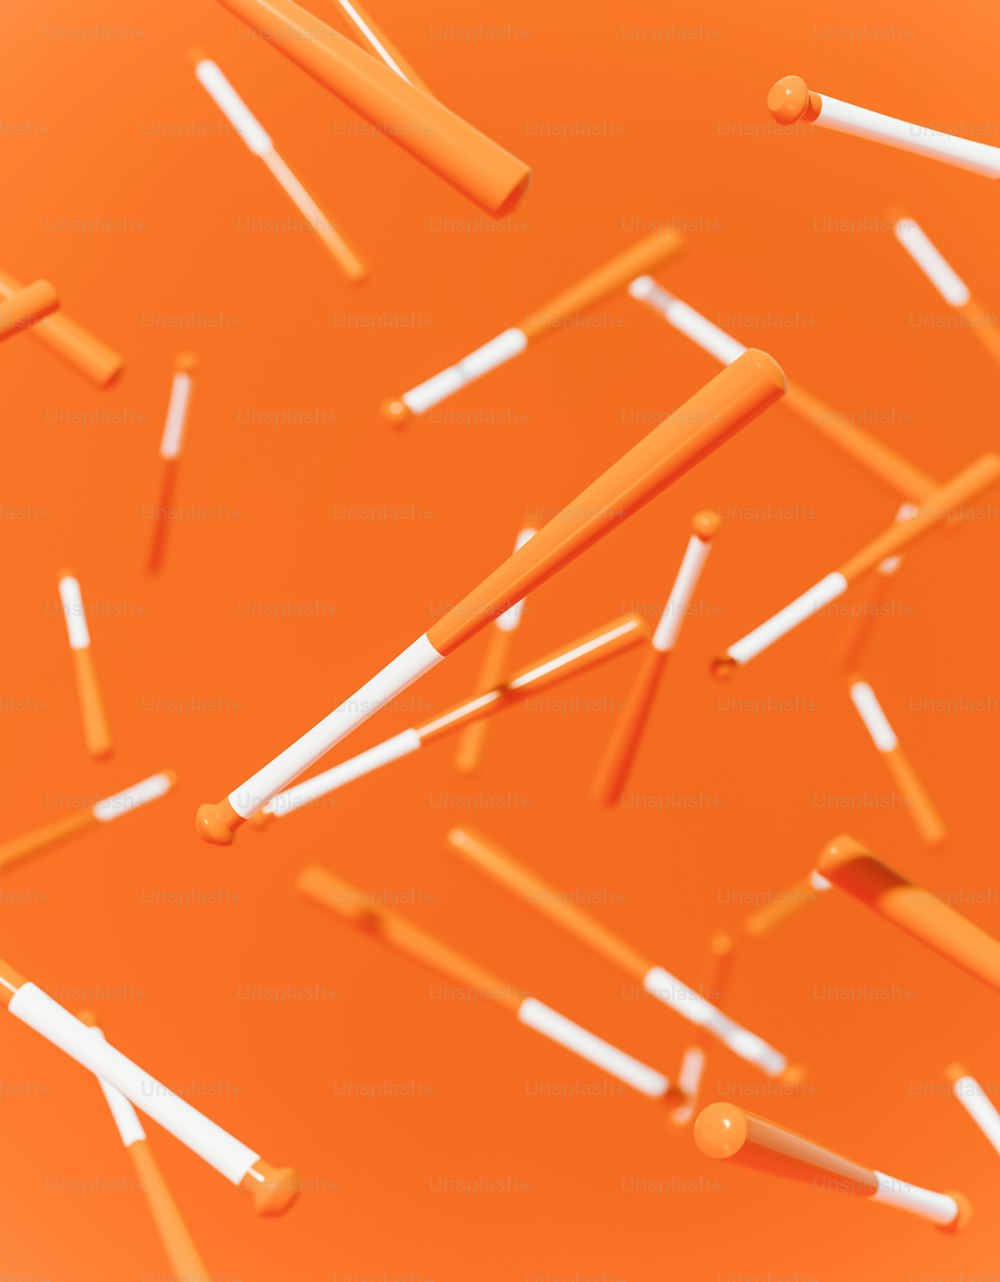 a bunch of orange and white toothbrushes on an orange background